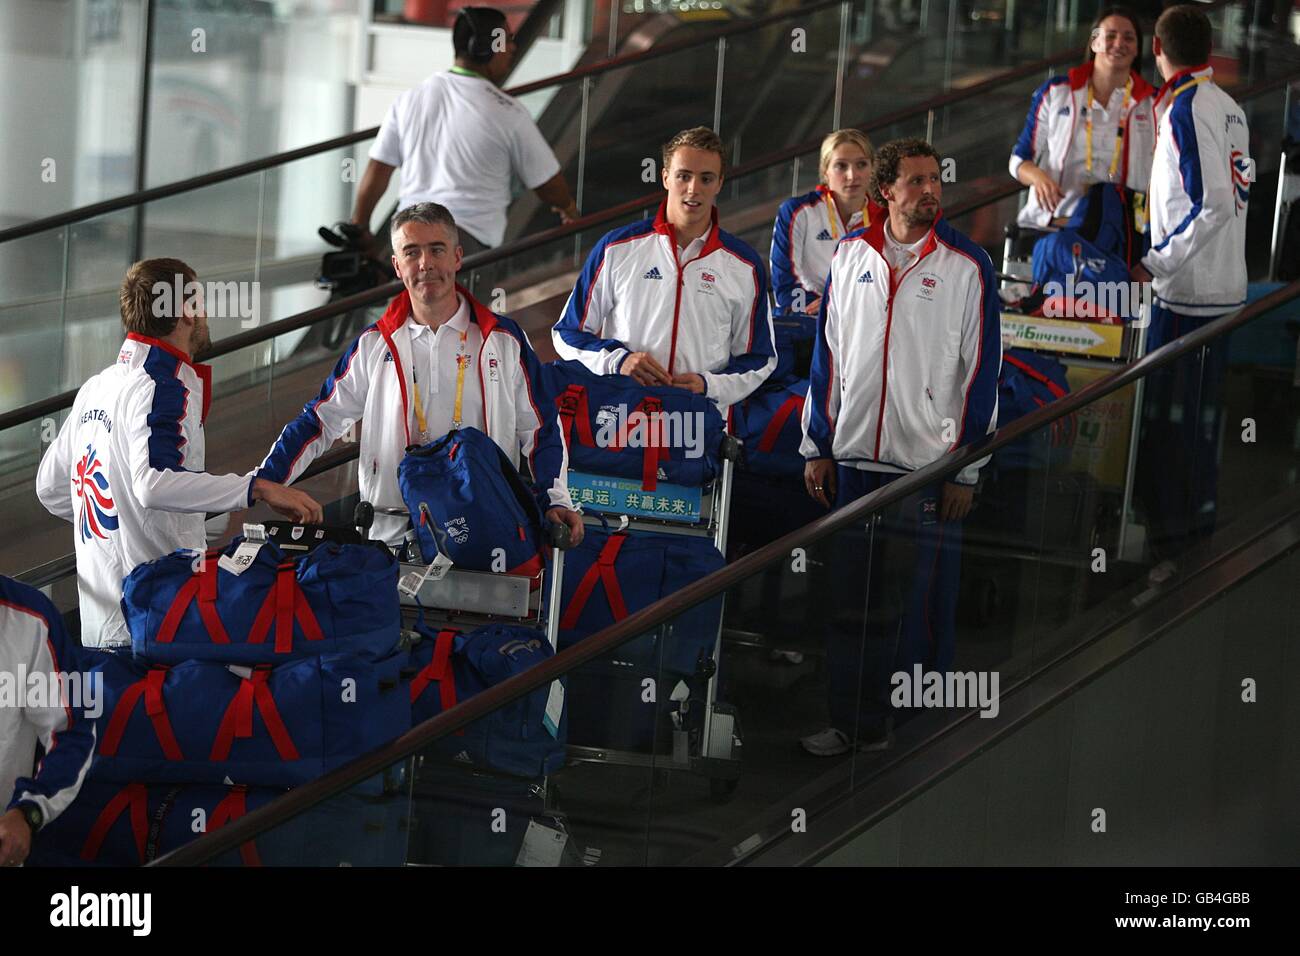 Some of the Great Britain Olympic team make their way through the terminal after arriving at Beijing airport as preparations continue for the start of the 2008 Beijing Olympic Games. Stock Photo